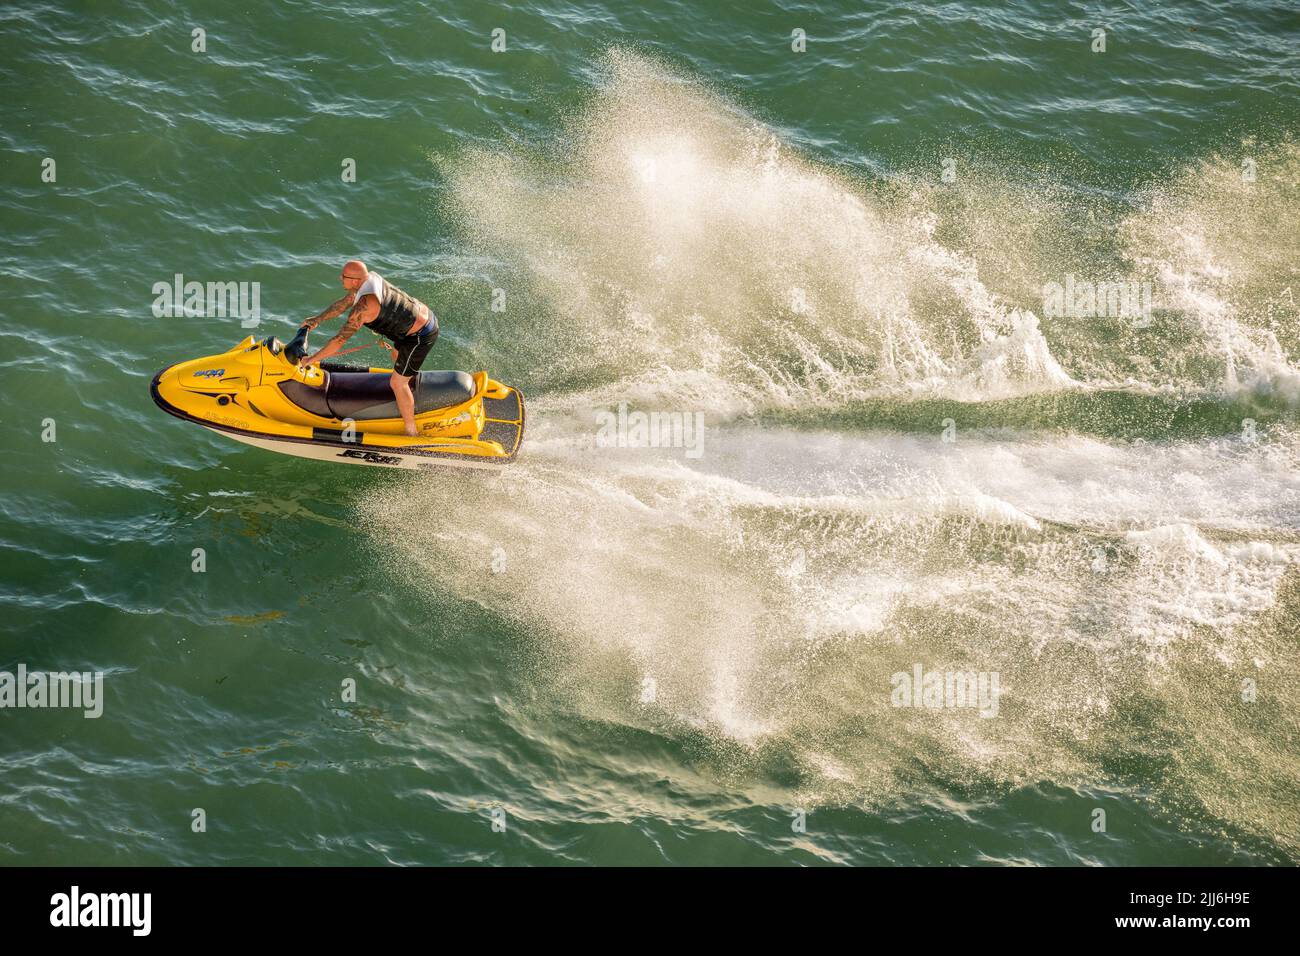 Male driving a Kawasaki 900STX jetsky in the Solent off Southampton, England. Stock Photo